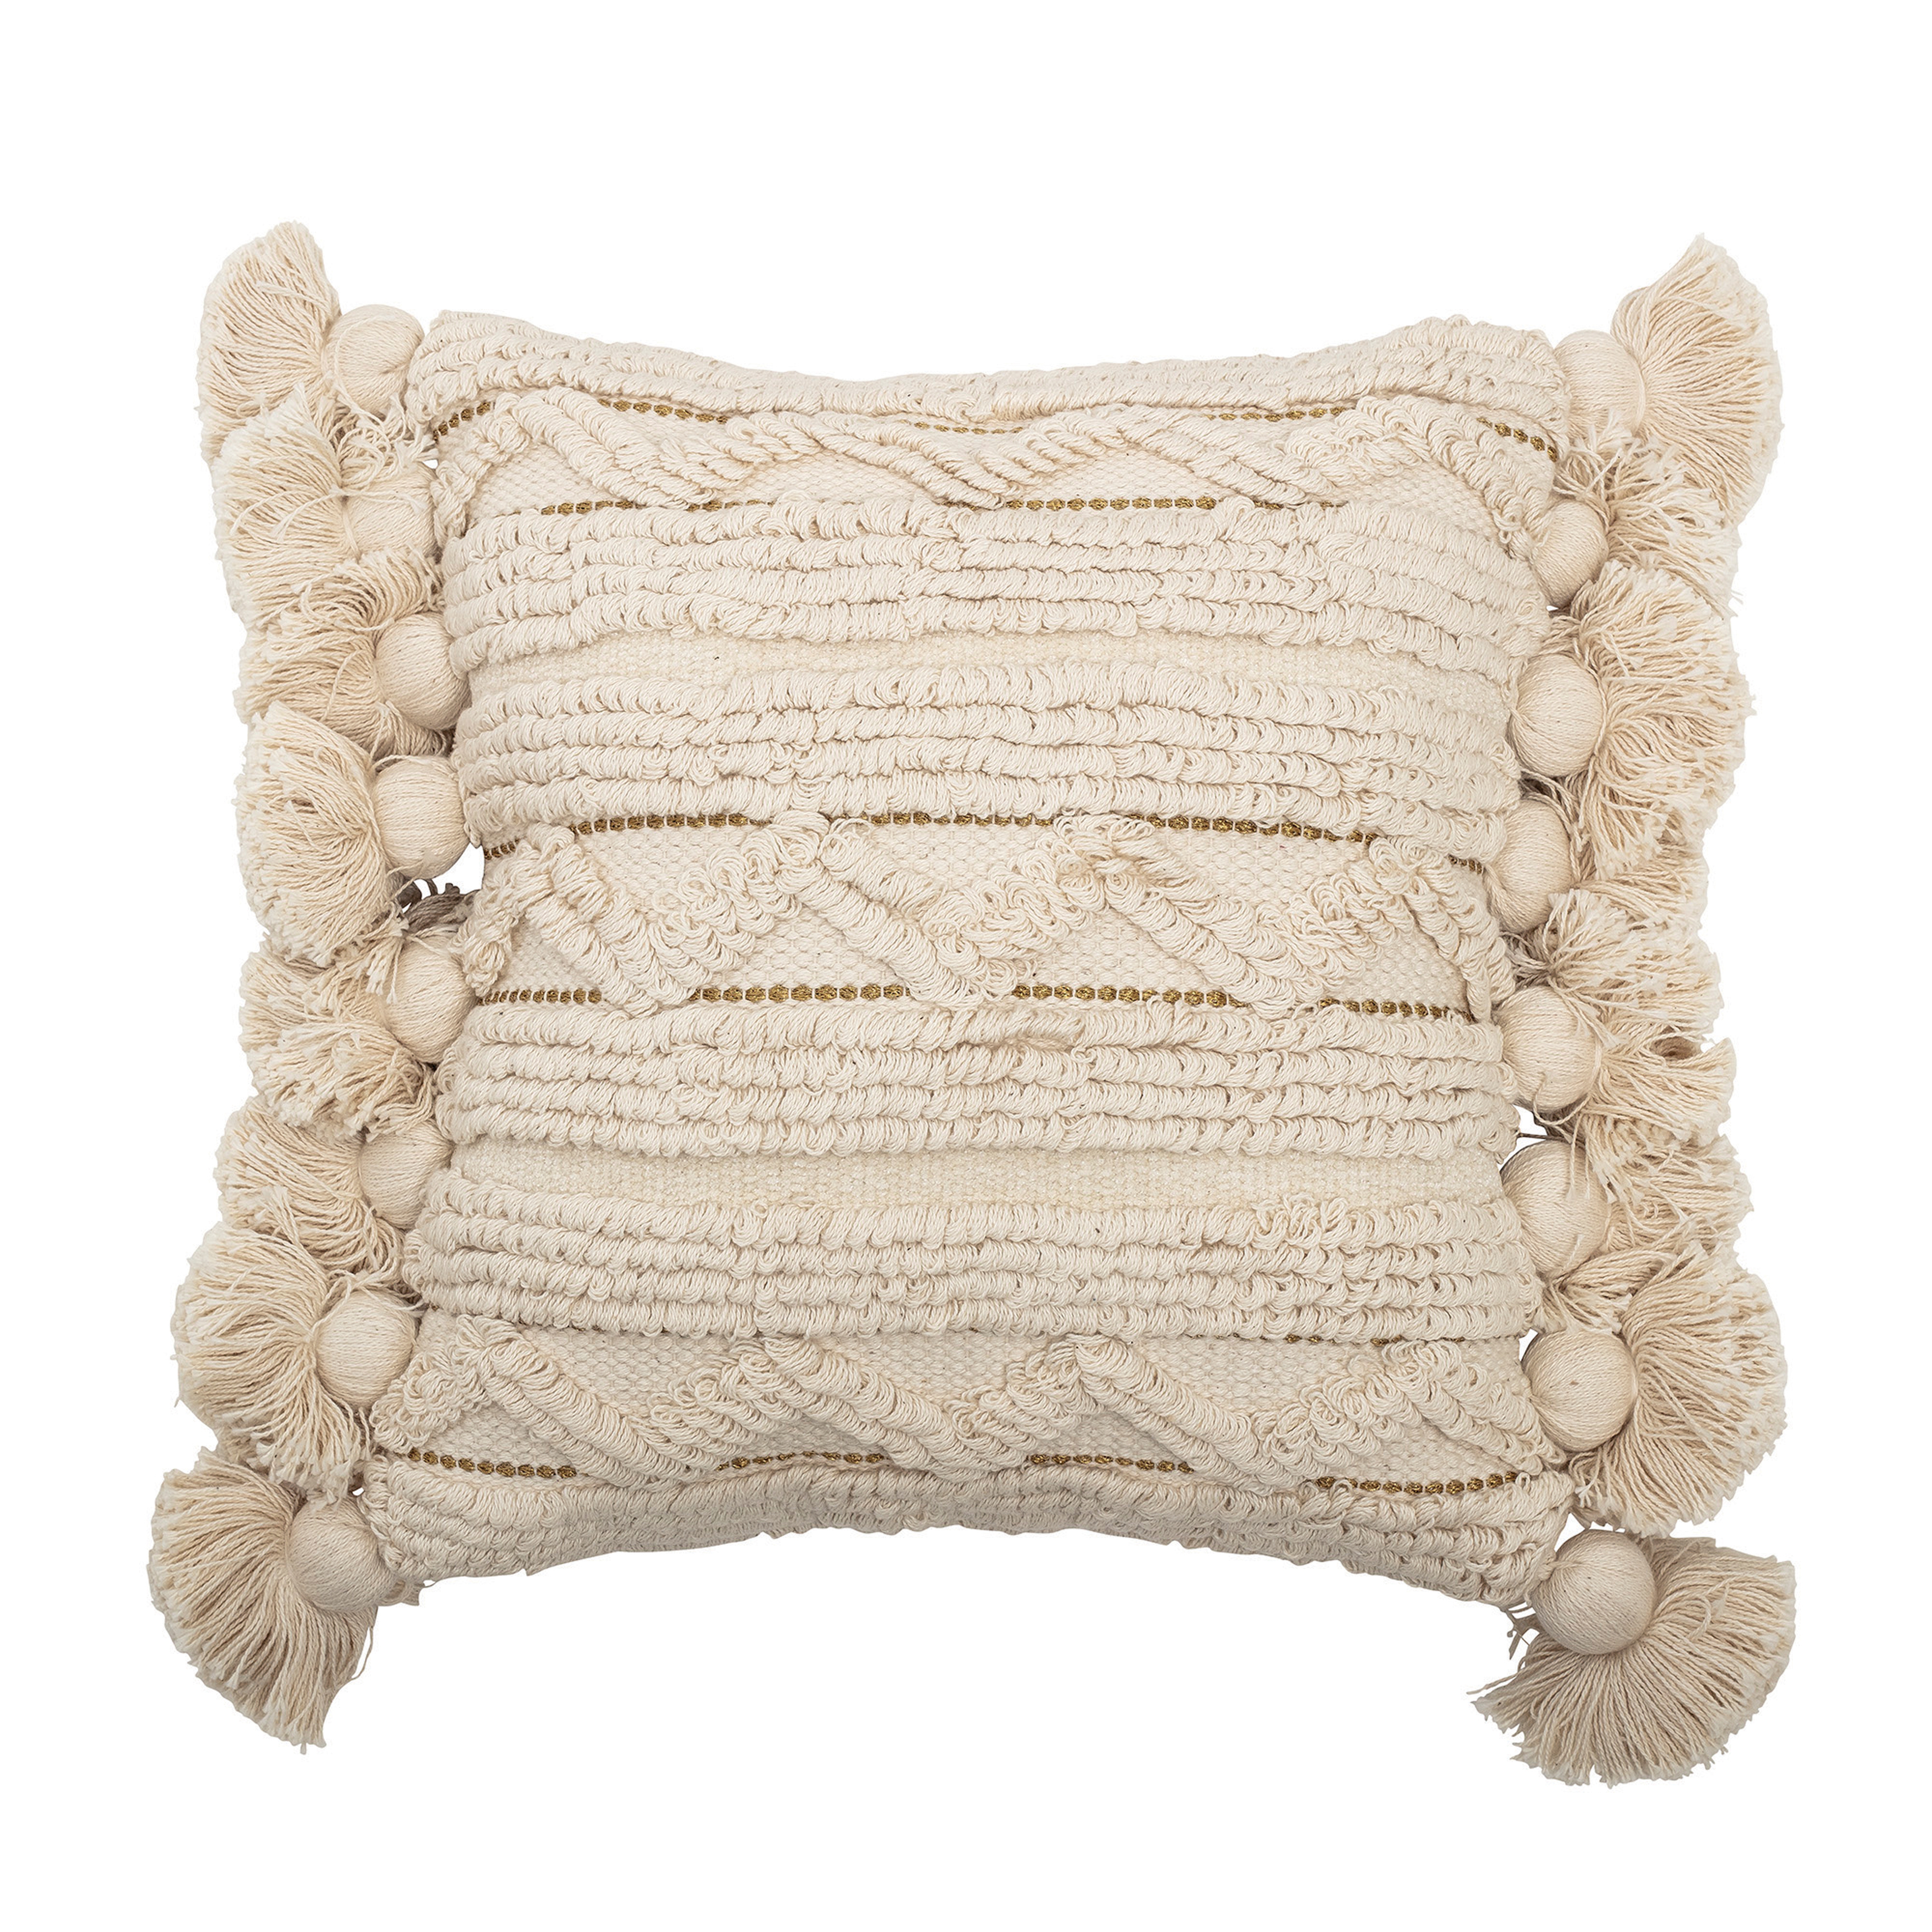 Off-White Cotton Looped Pillow with Gold Metallic Thread Accents, Tassels & Solid Off-White Back - Moss & Wilder